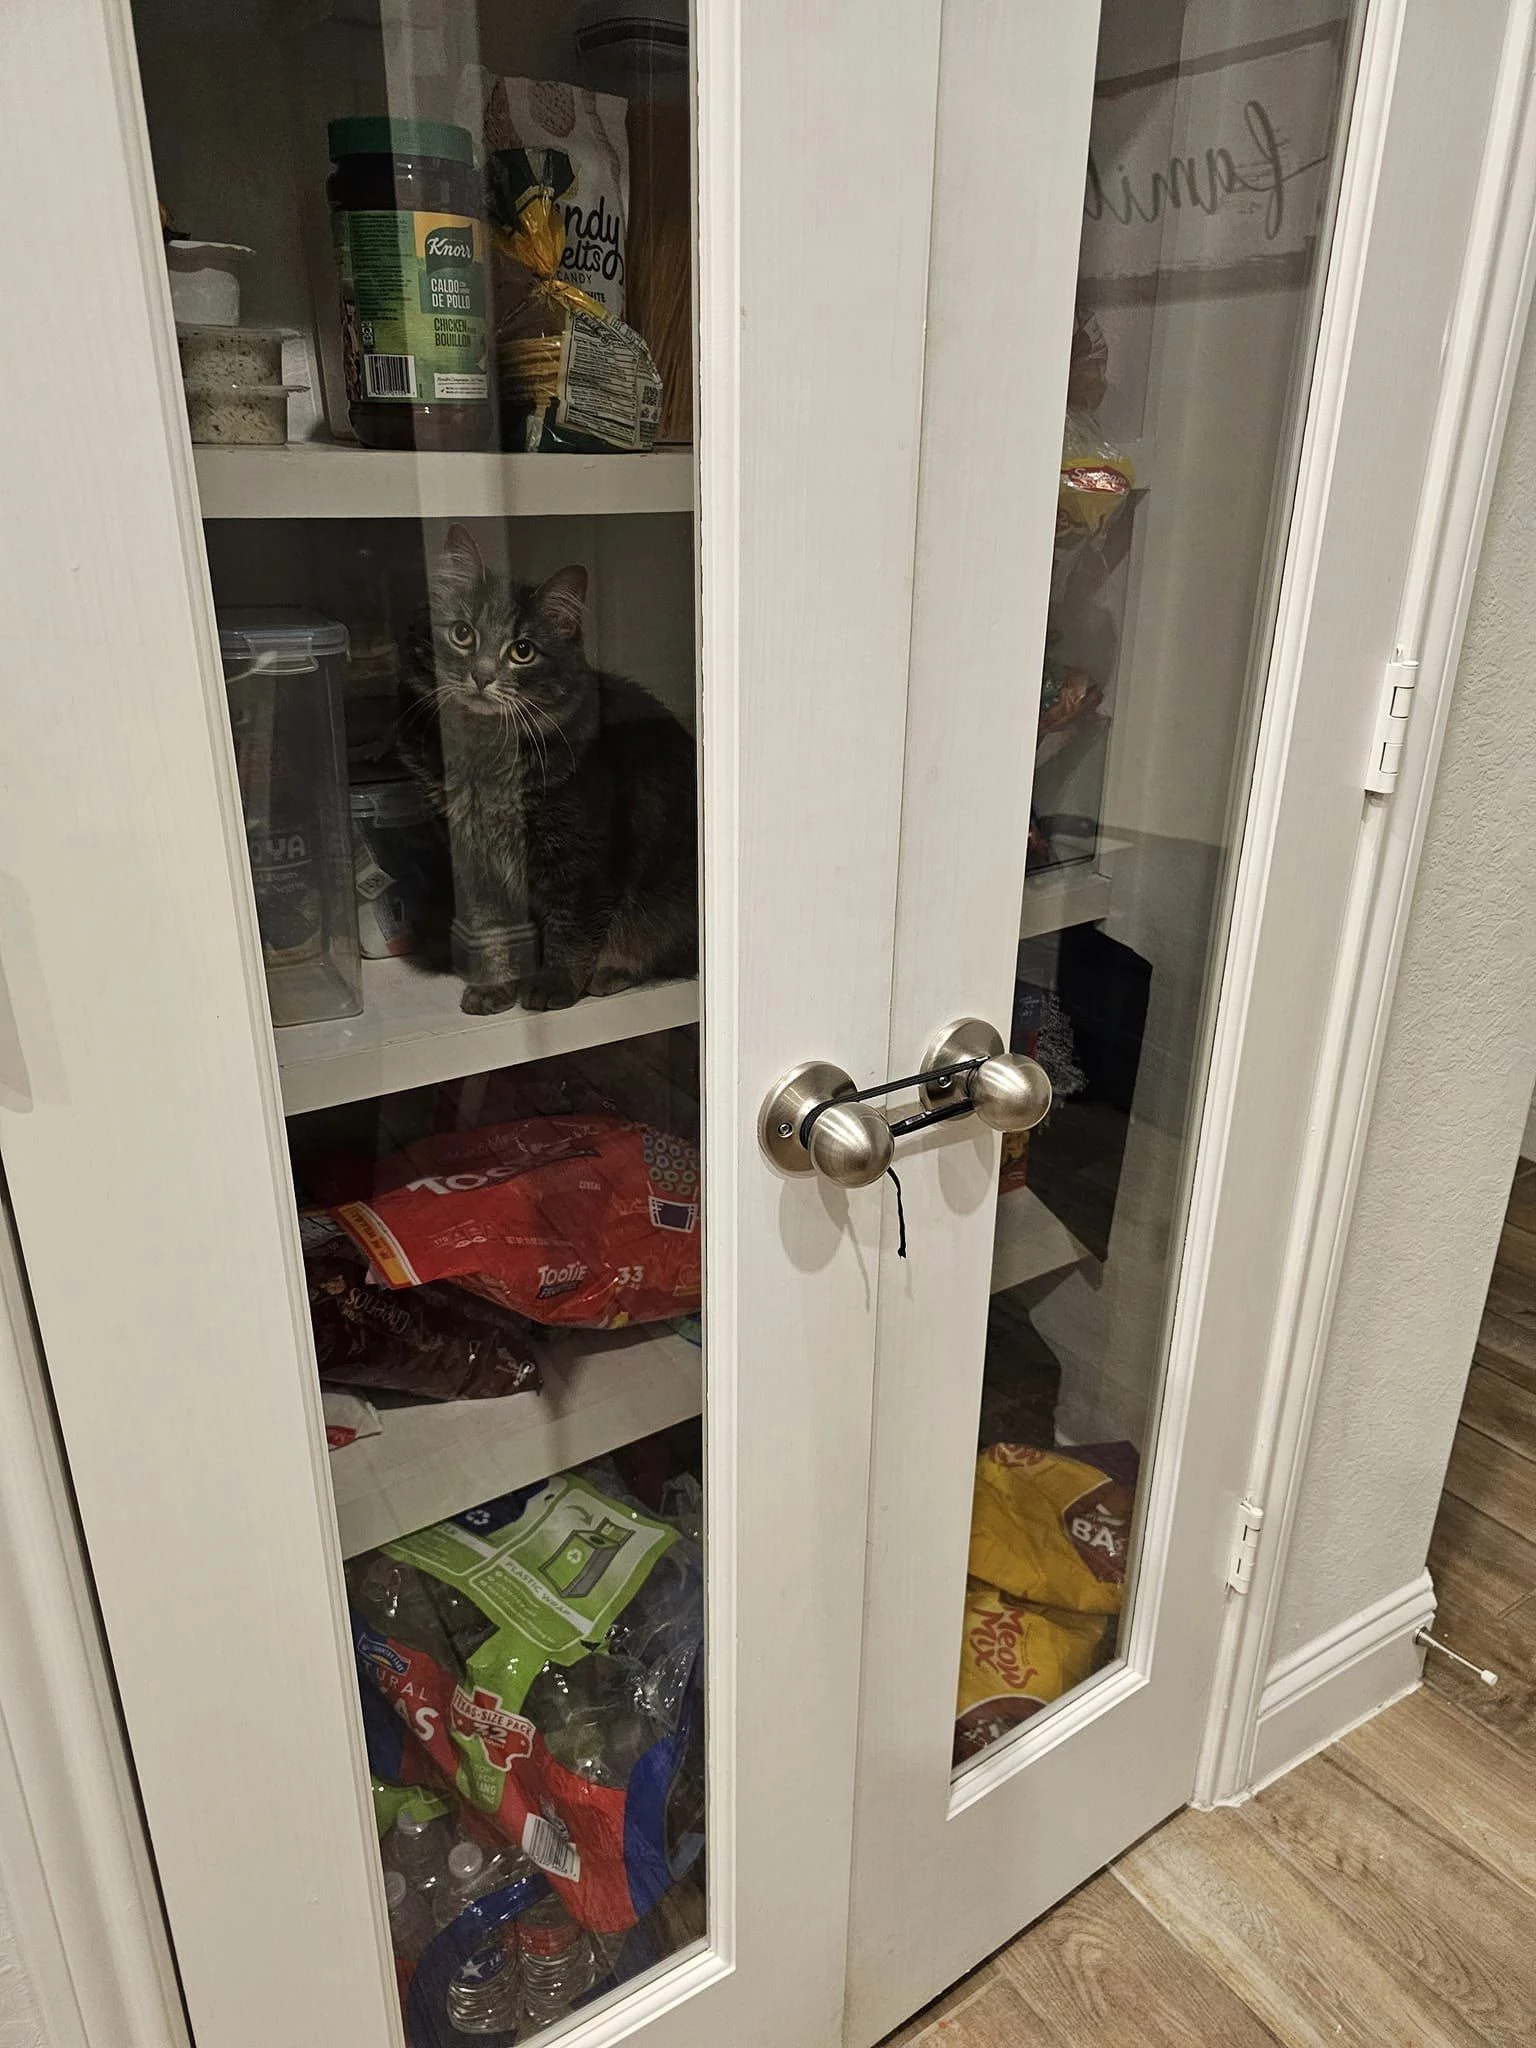 Luna intrudes into the pantry whenever she can.